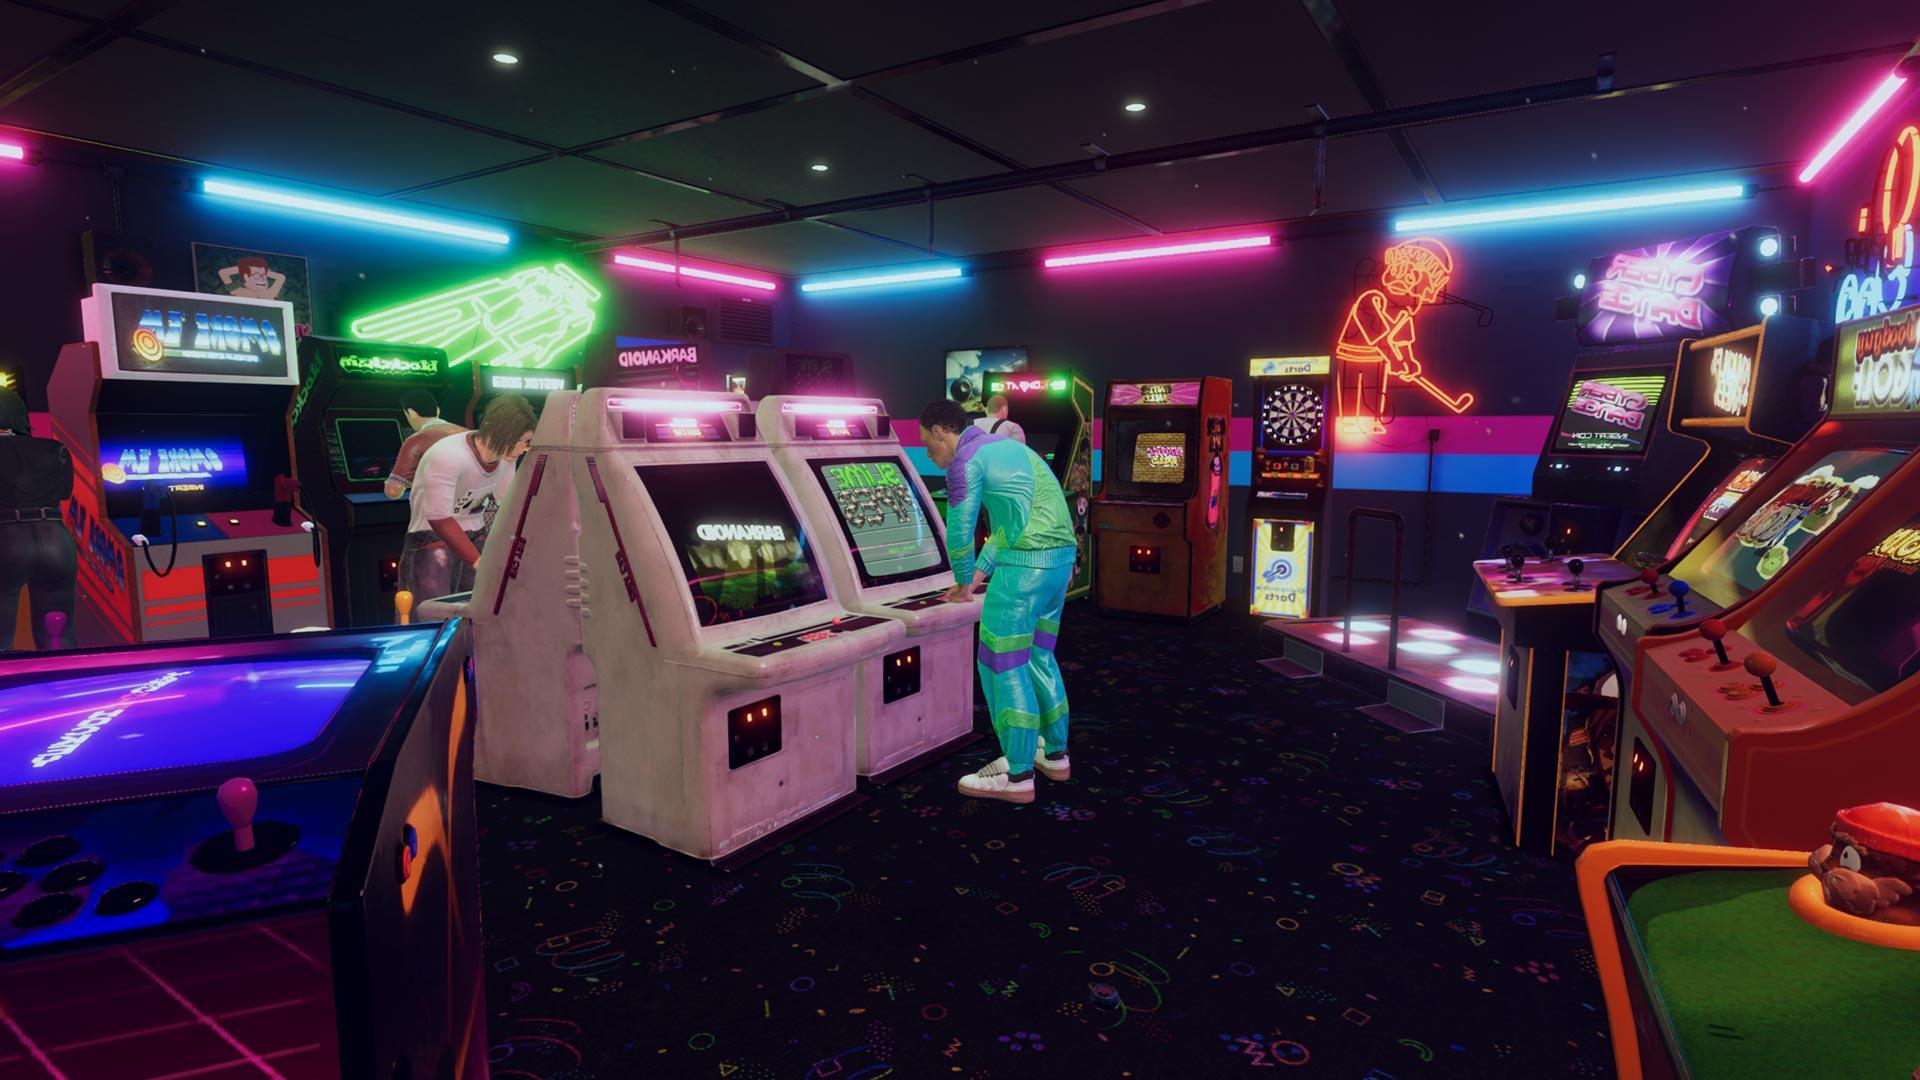 Arcade Paradise takes place on the 11th August News 24